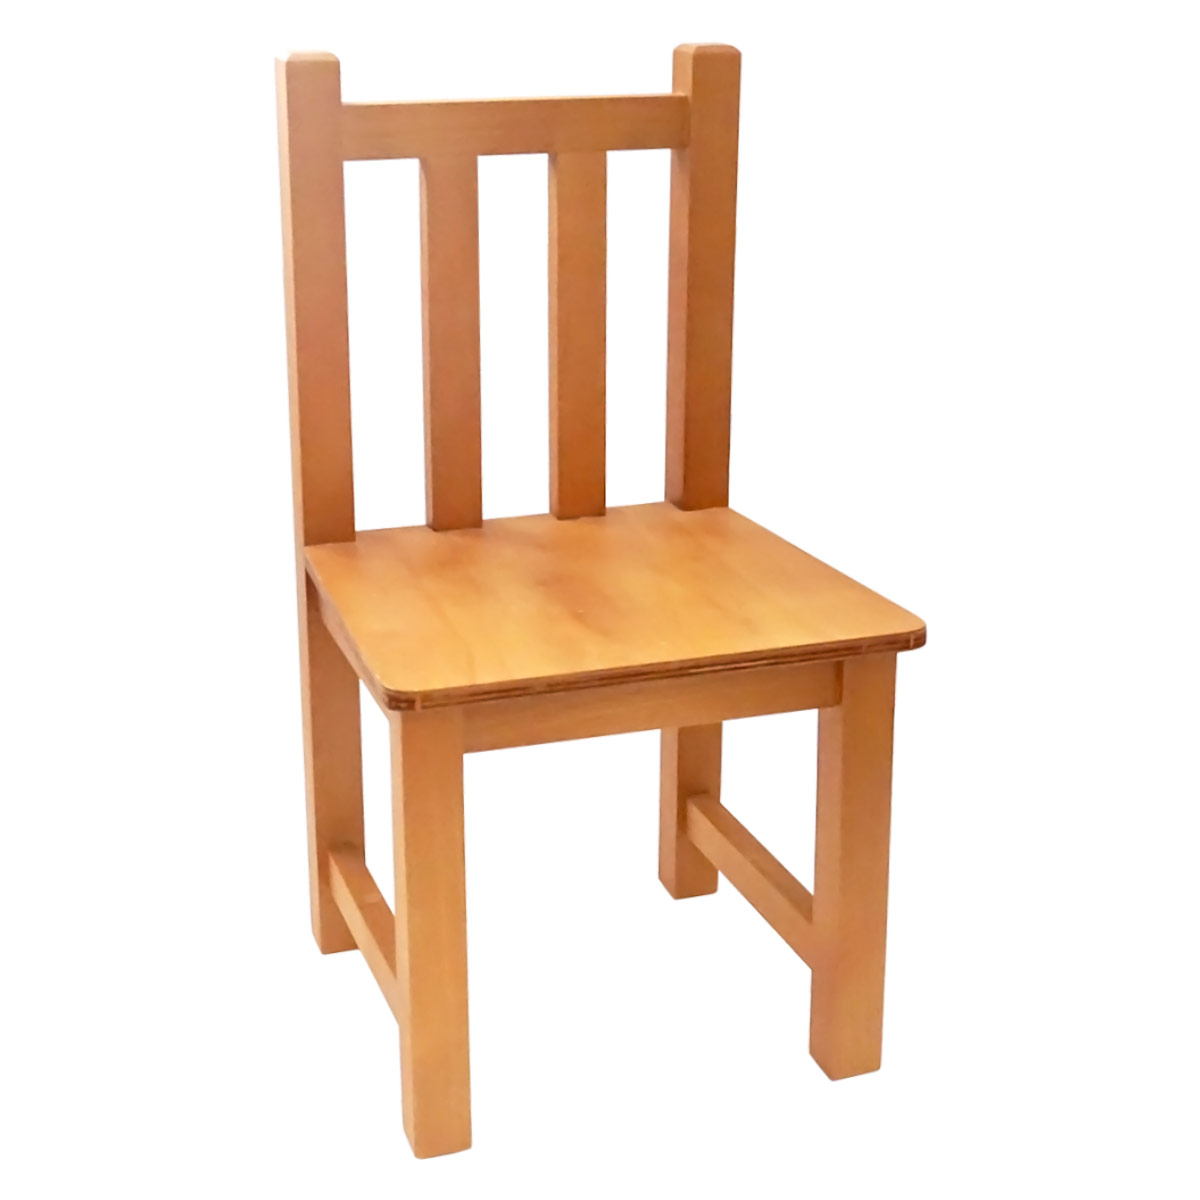 Small Chair Polished Without Arms – Montessori Materials, Learning Toys ...